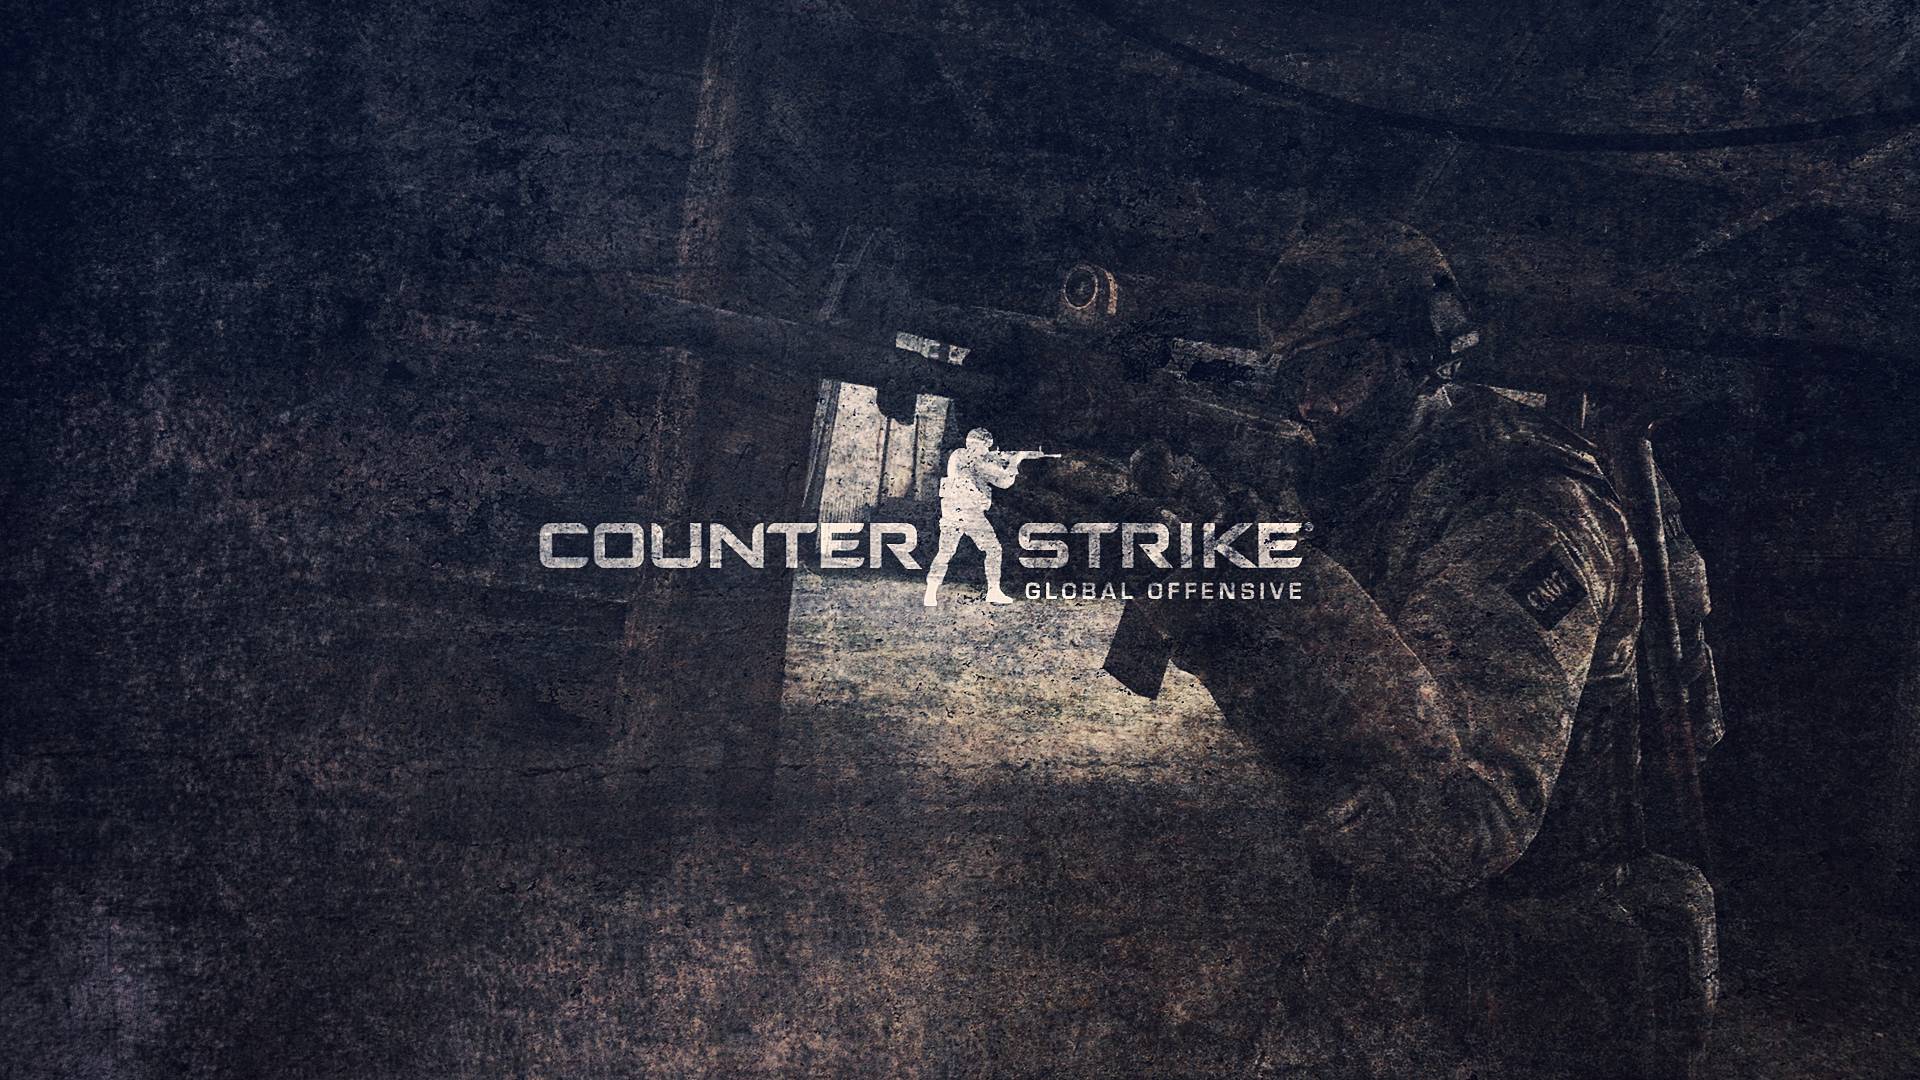 video game, counter strike: global offensive, counter strike 2160p